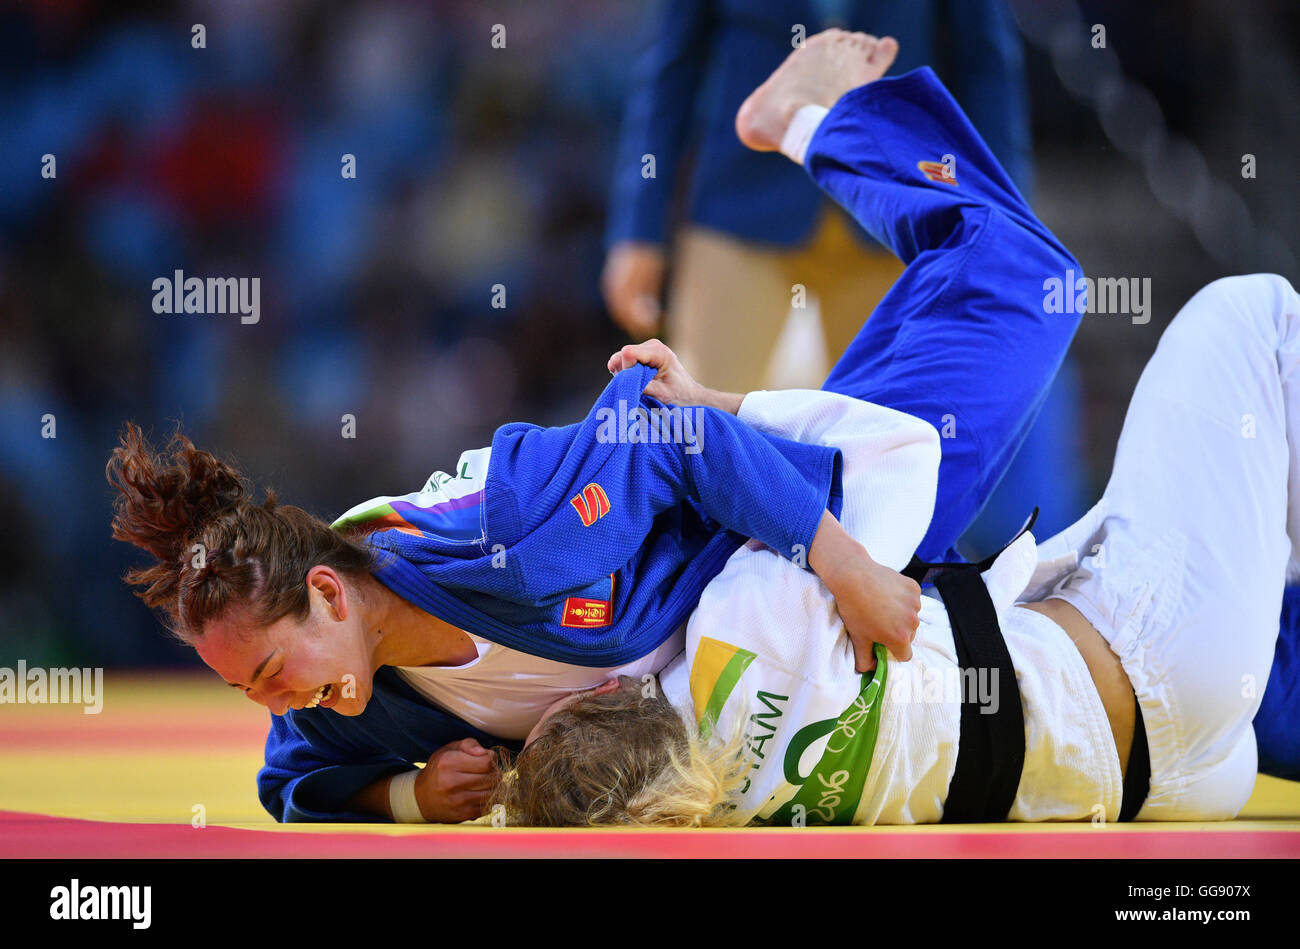 Rio de Janeiro, Brazil. 10th Aug, 2016. Naranjargal Tsend-Ayush of Mongolia (blue) celebrates against Esther Stam of Georgia during the Women -70 kg Elimination Round of 32 of the Judo event during the Olympic Games at Carioca Arena 2 in Rio de Janeiro, Brazil, 10 August 2016. Photo: Lukas Schulze/dpa/Alamy Live News Stock Photo